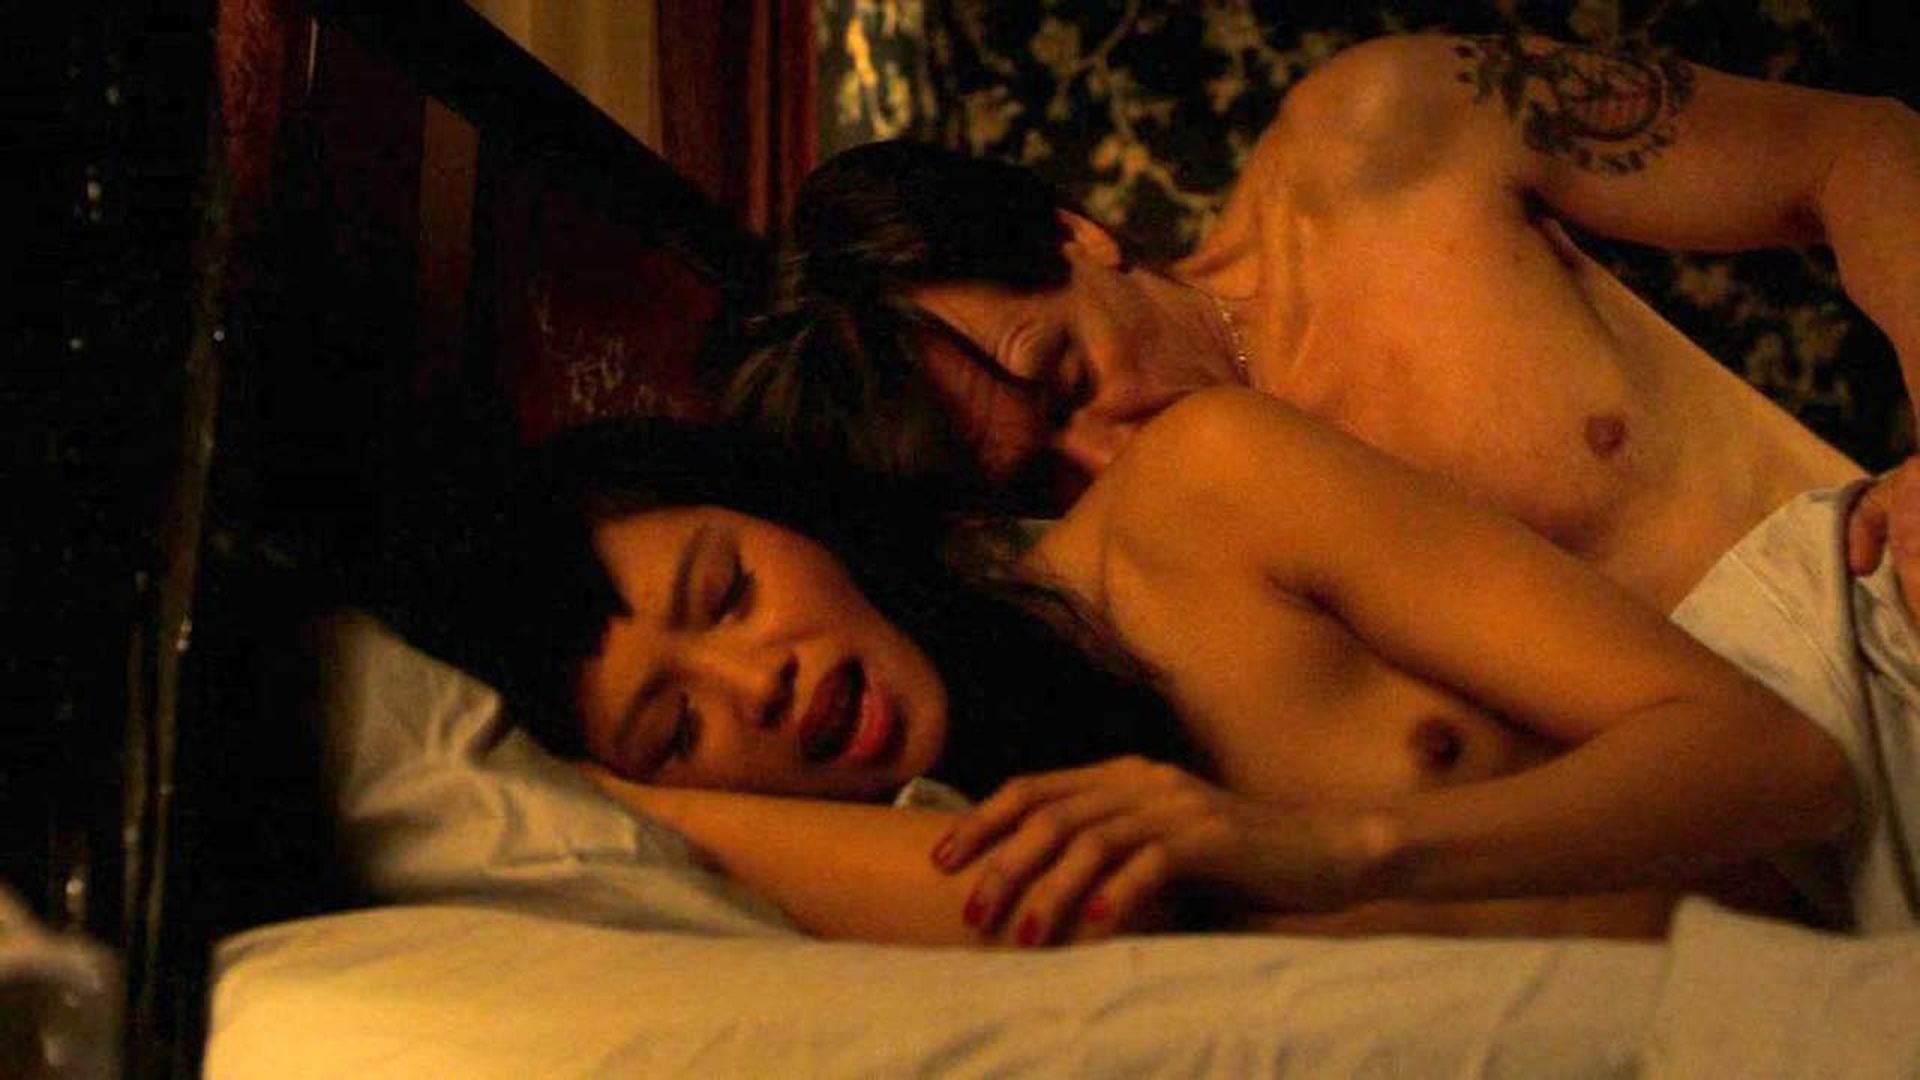 Watch another one Charlene Almarvez nude sex scene from "City on a Hil...